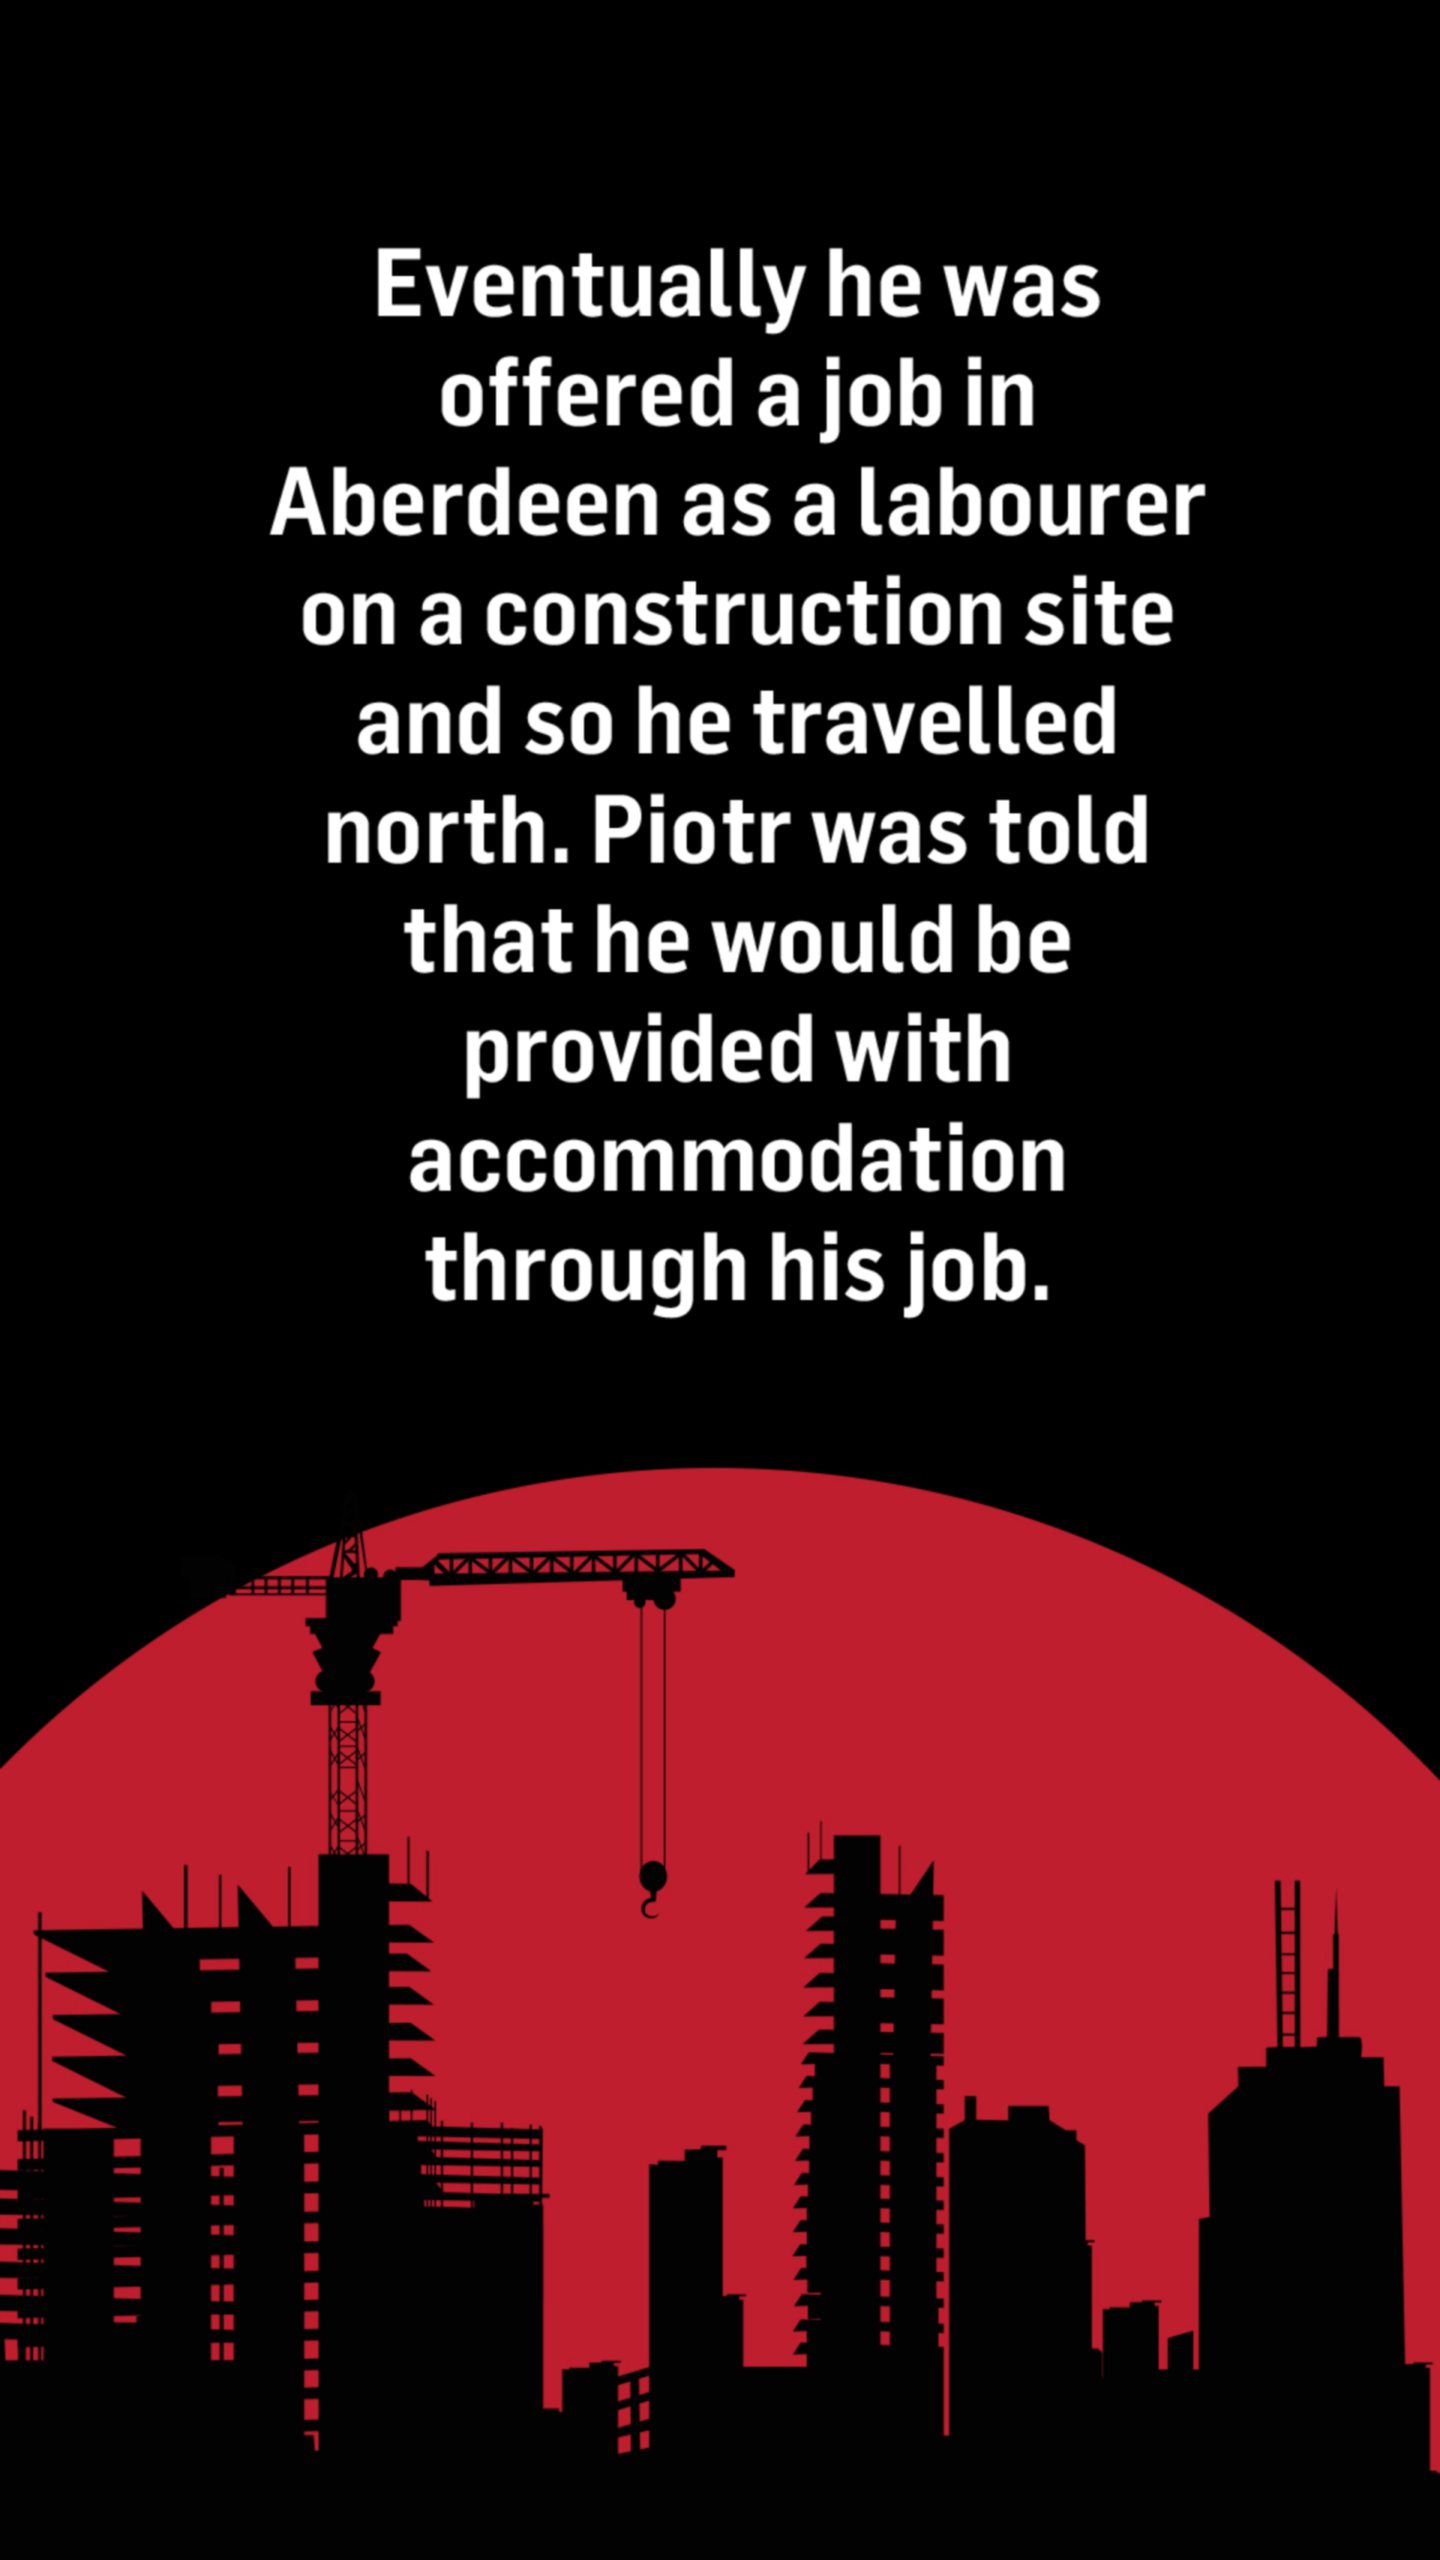 An illustration of a silhouette of a construction site. The words above the image read: Eventually he was offered a job in Aberdeen as a labourer on a construction site and so he travelled north. Piotr was told that he would be provided with accommodation through his job.